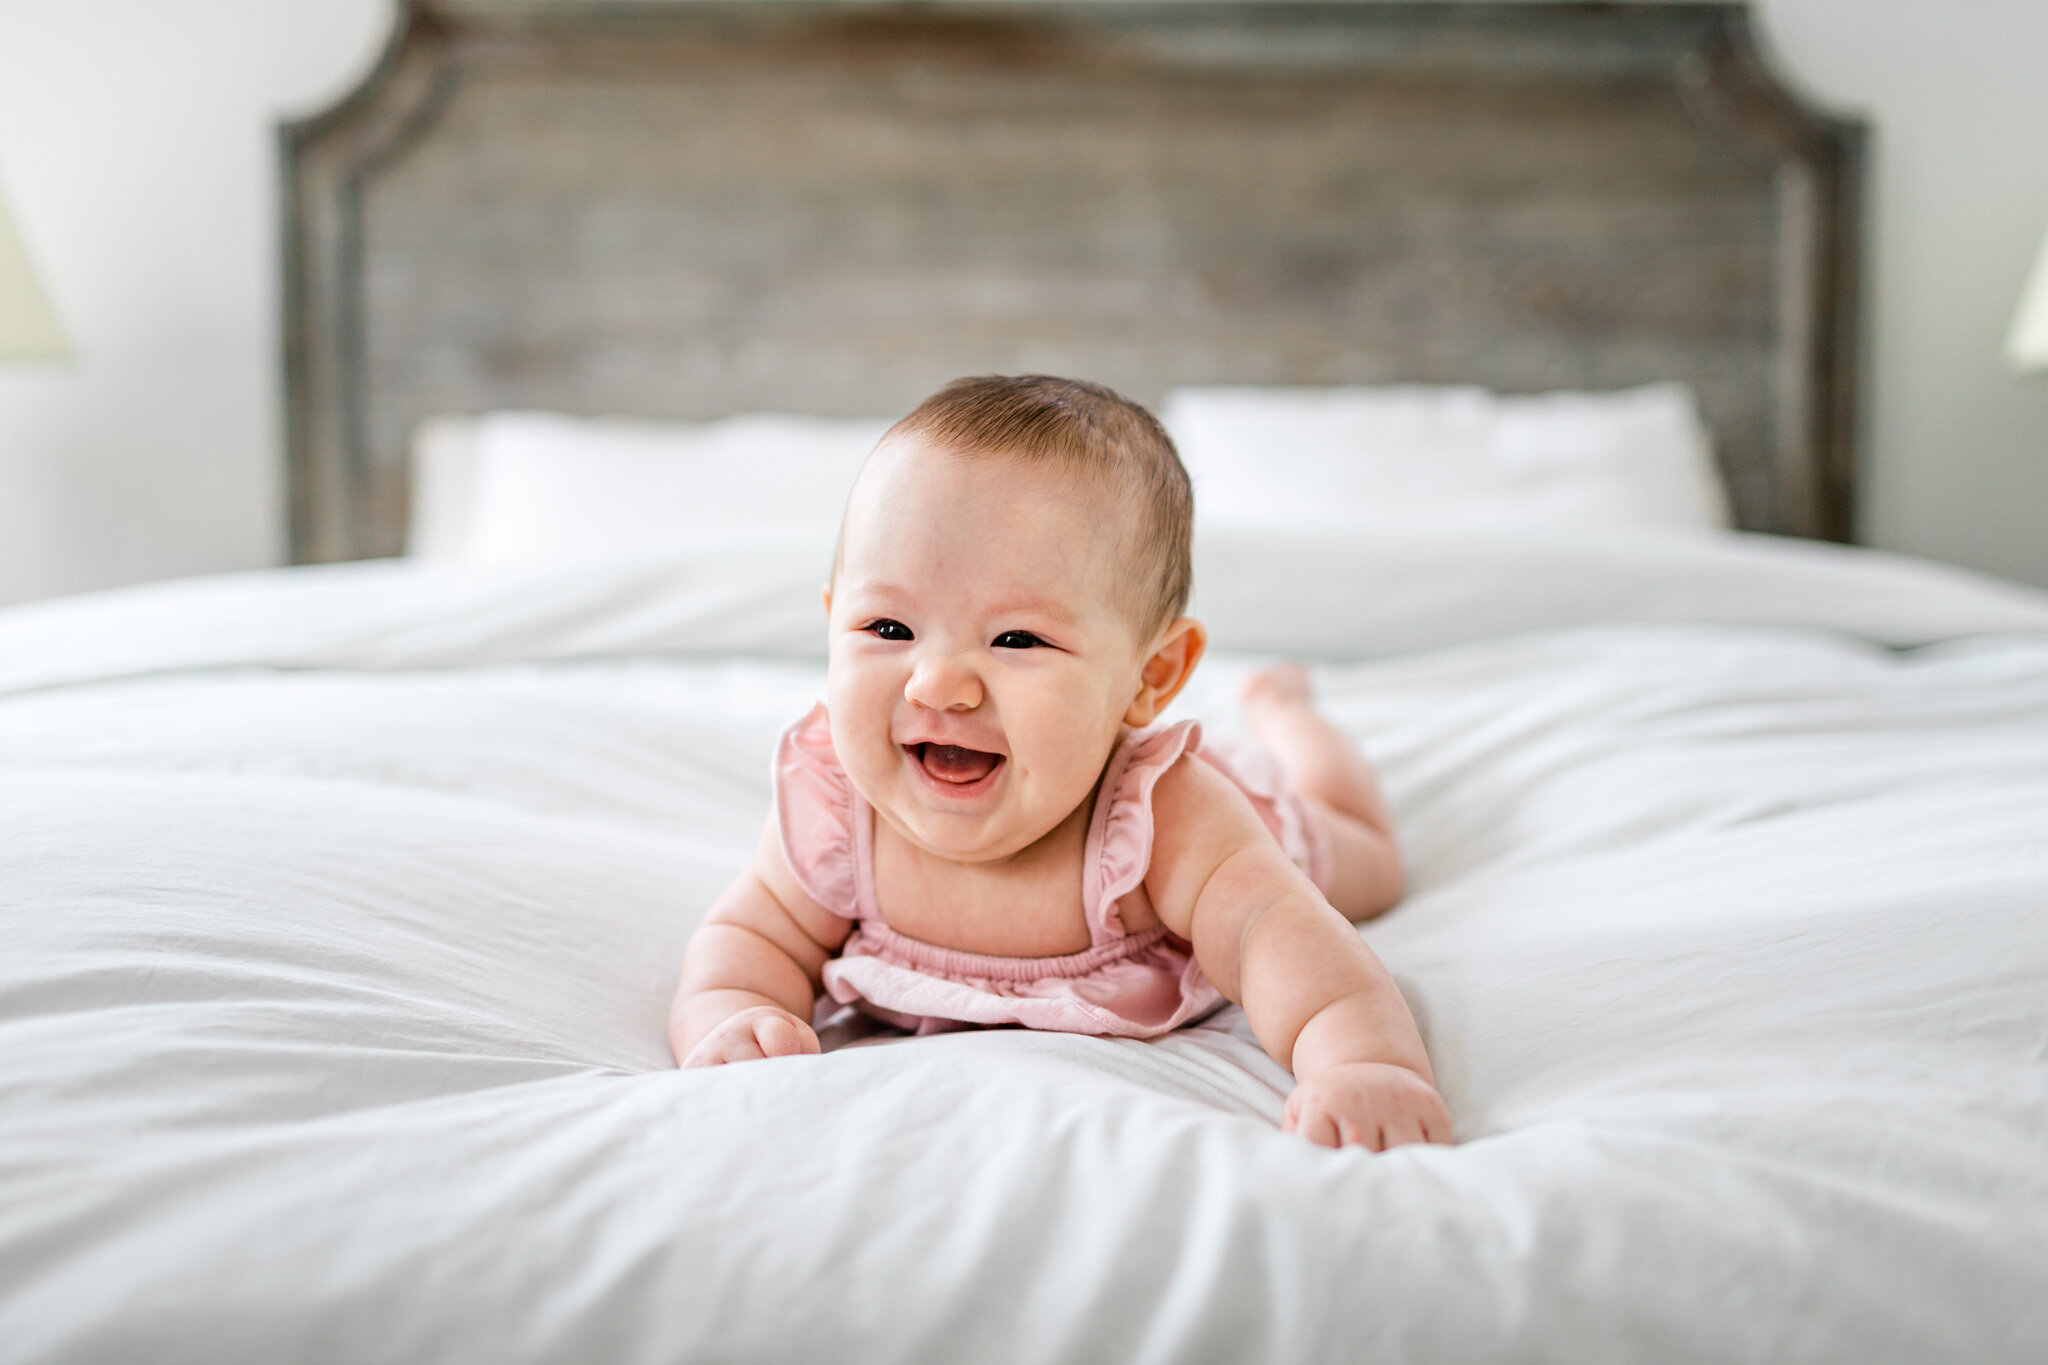 Raleigh Family Photographer | By G. Lin Photography | Baby girl laughing